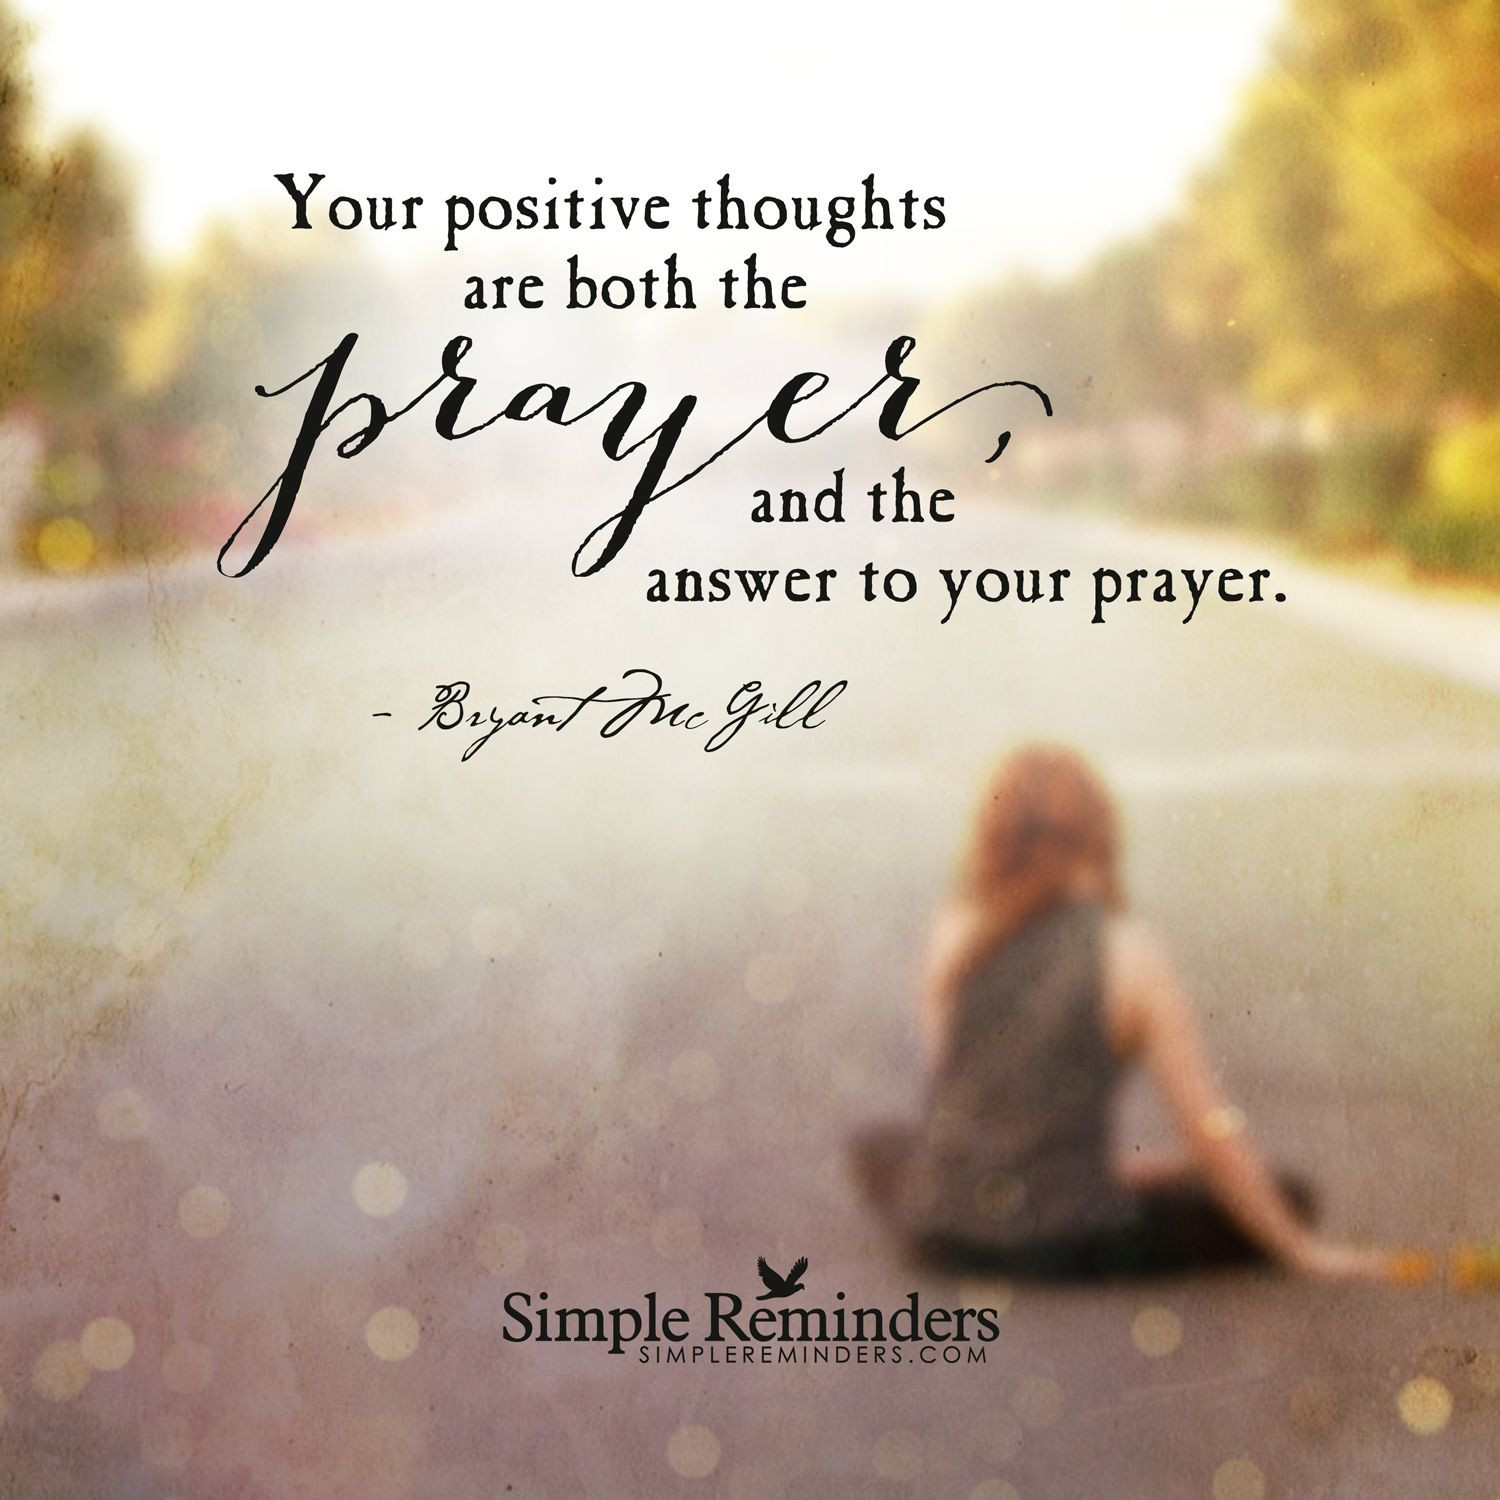 Positive Prayer Quotes
 Positive thinking is a blessing Your positive thoughts are